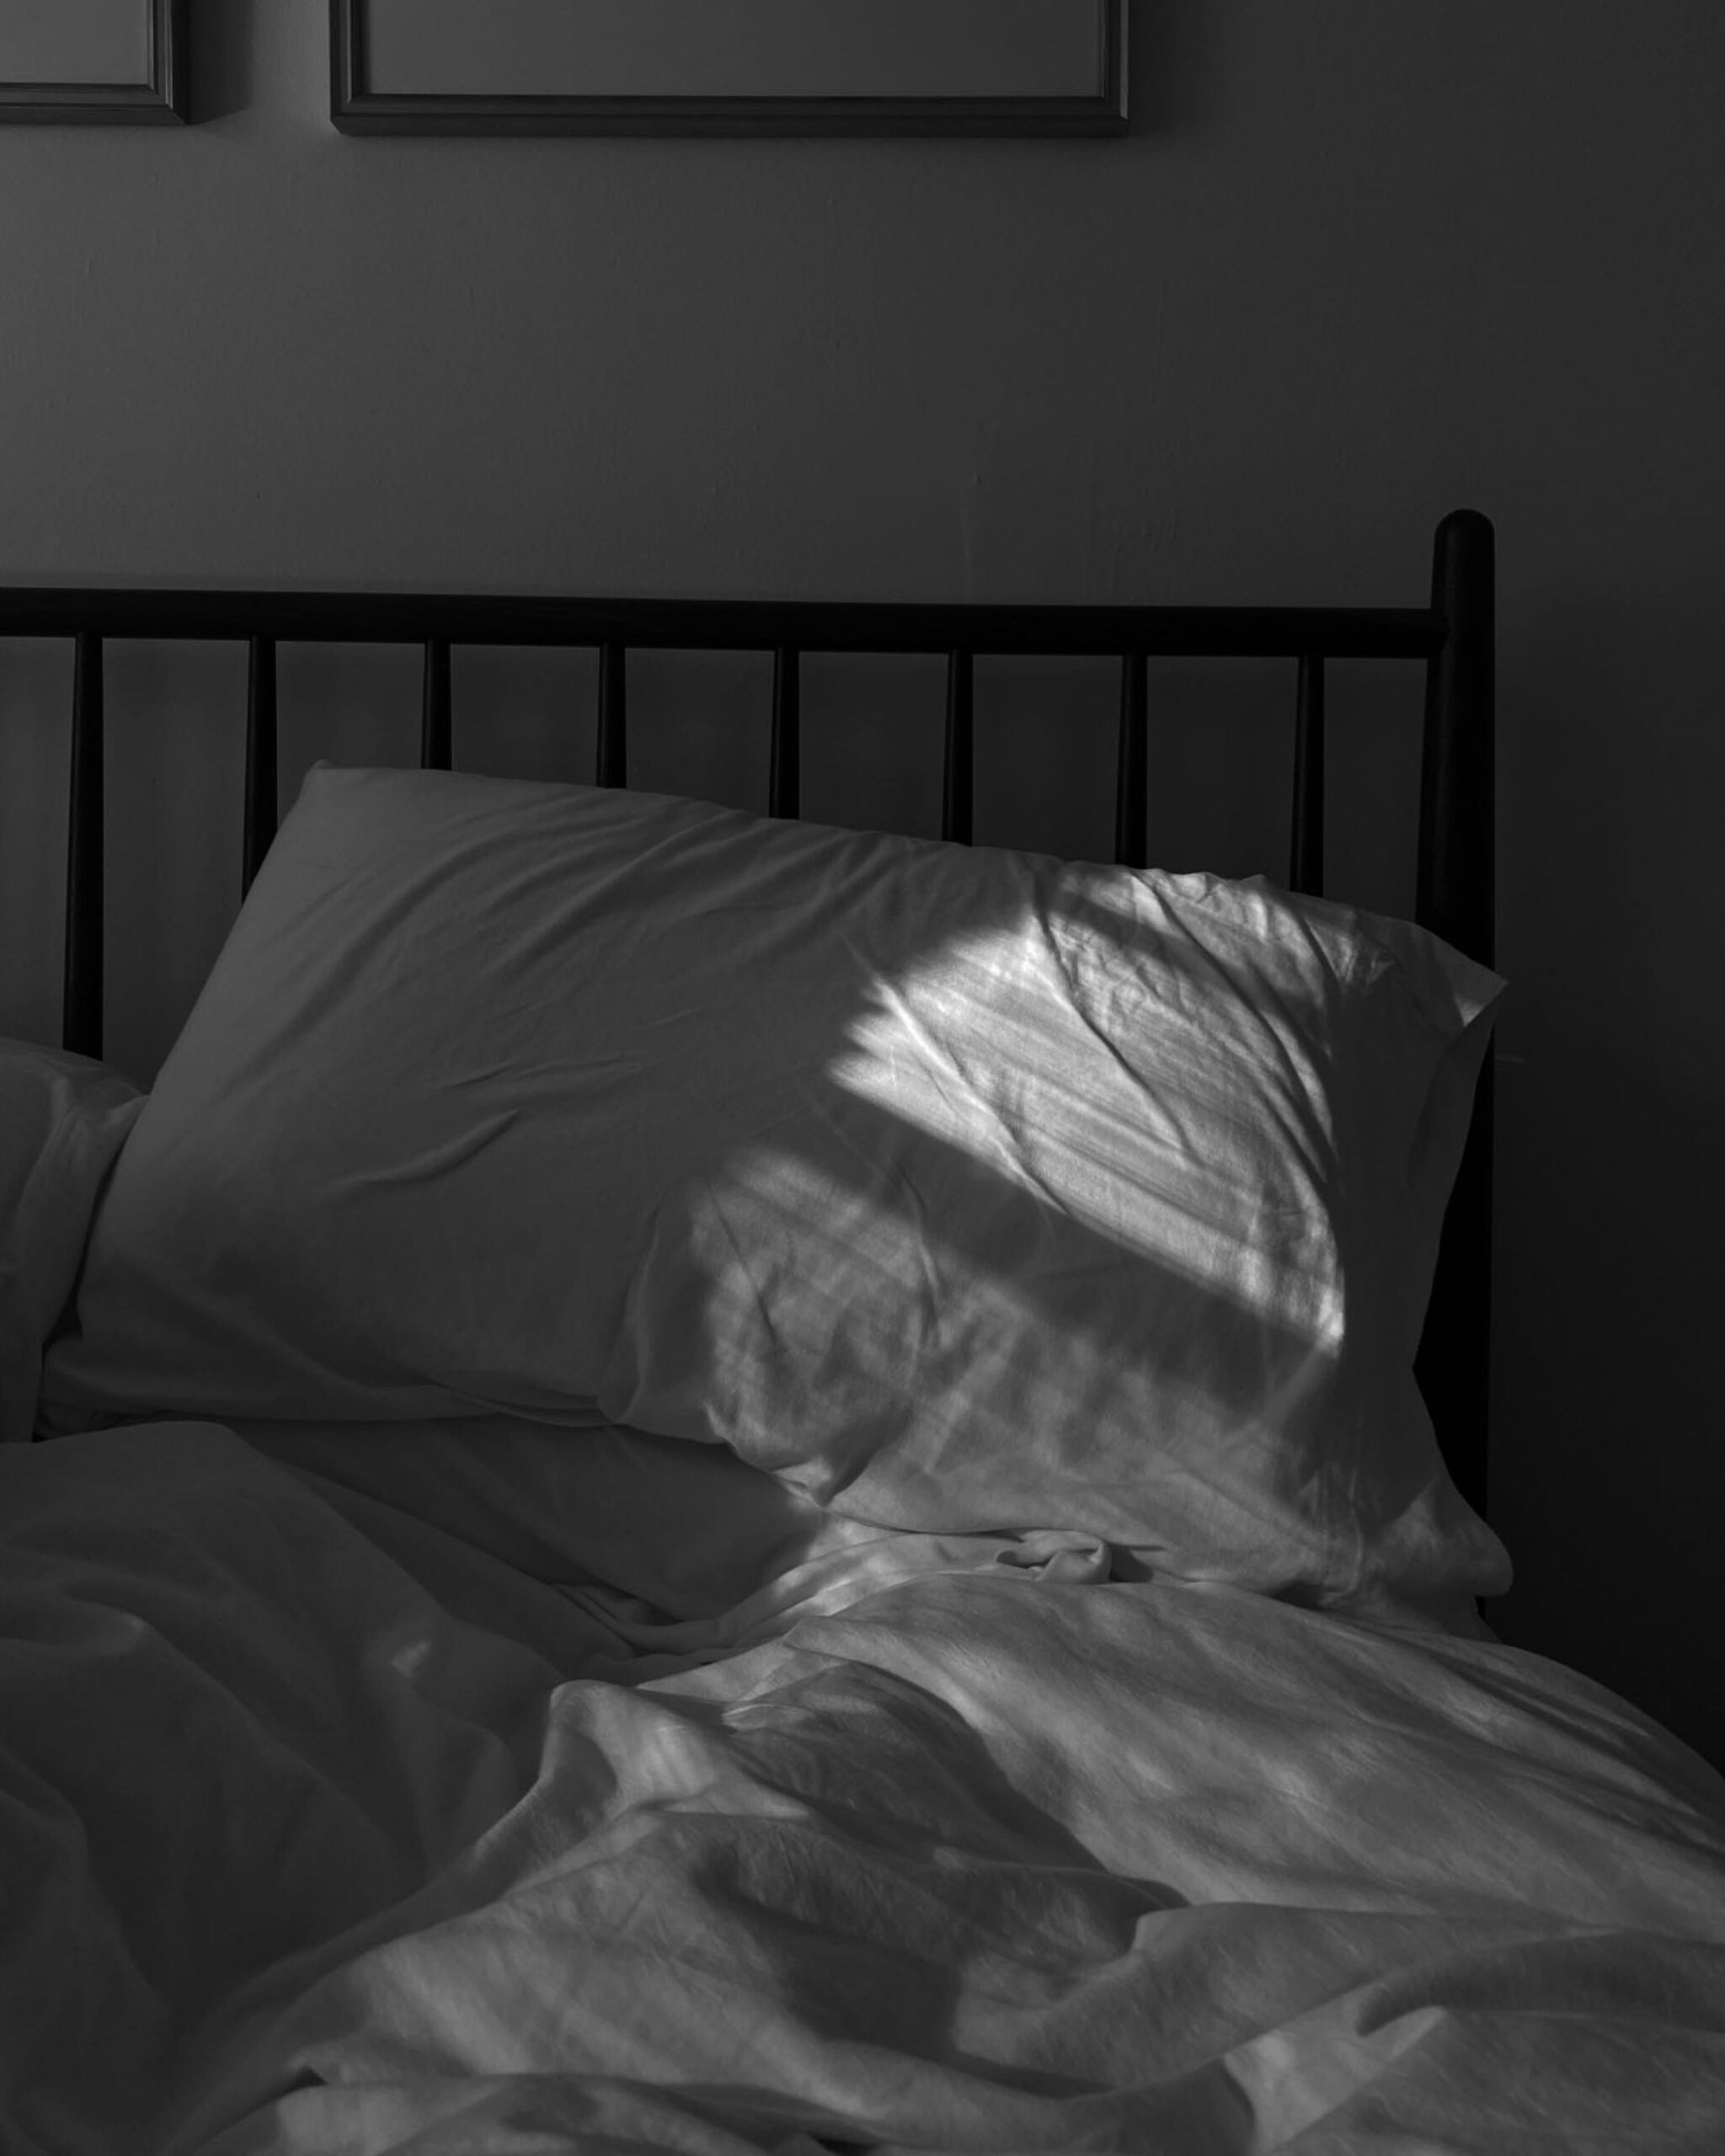 The sun casts light across a pillow on an unmade bed in the morning.